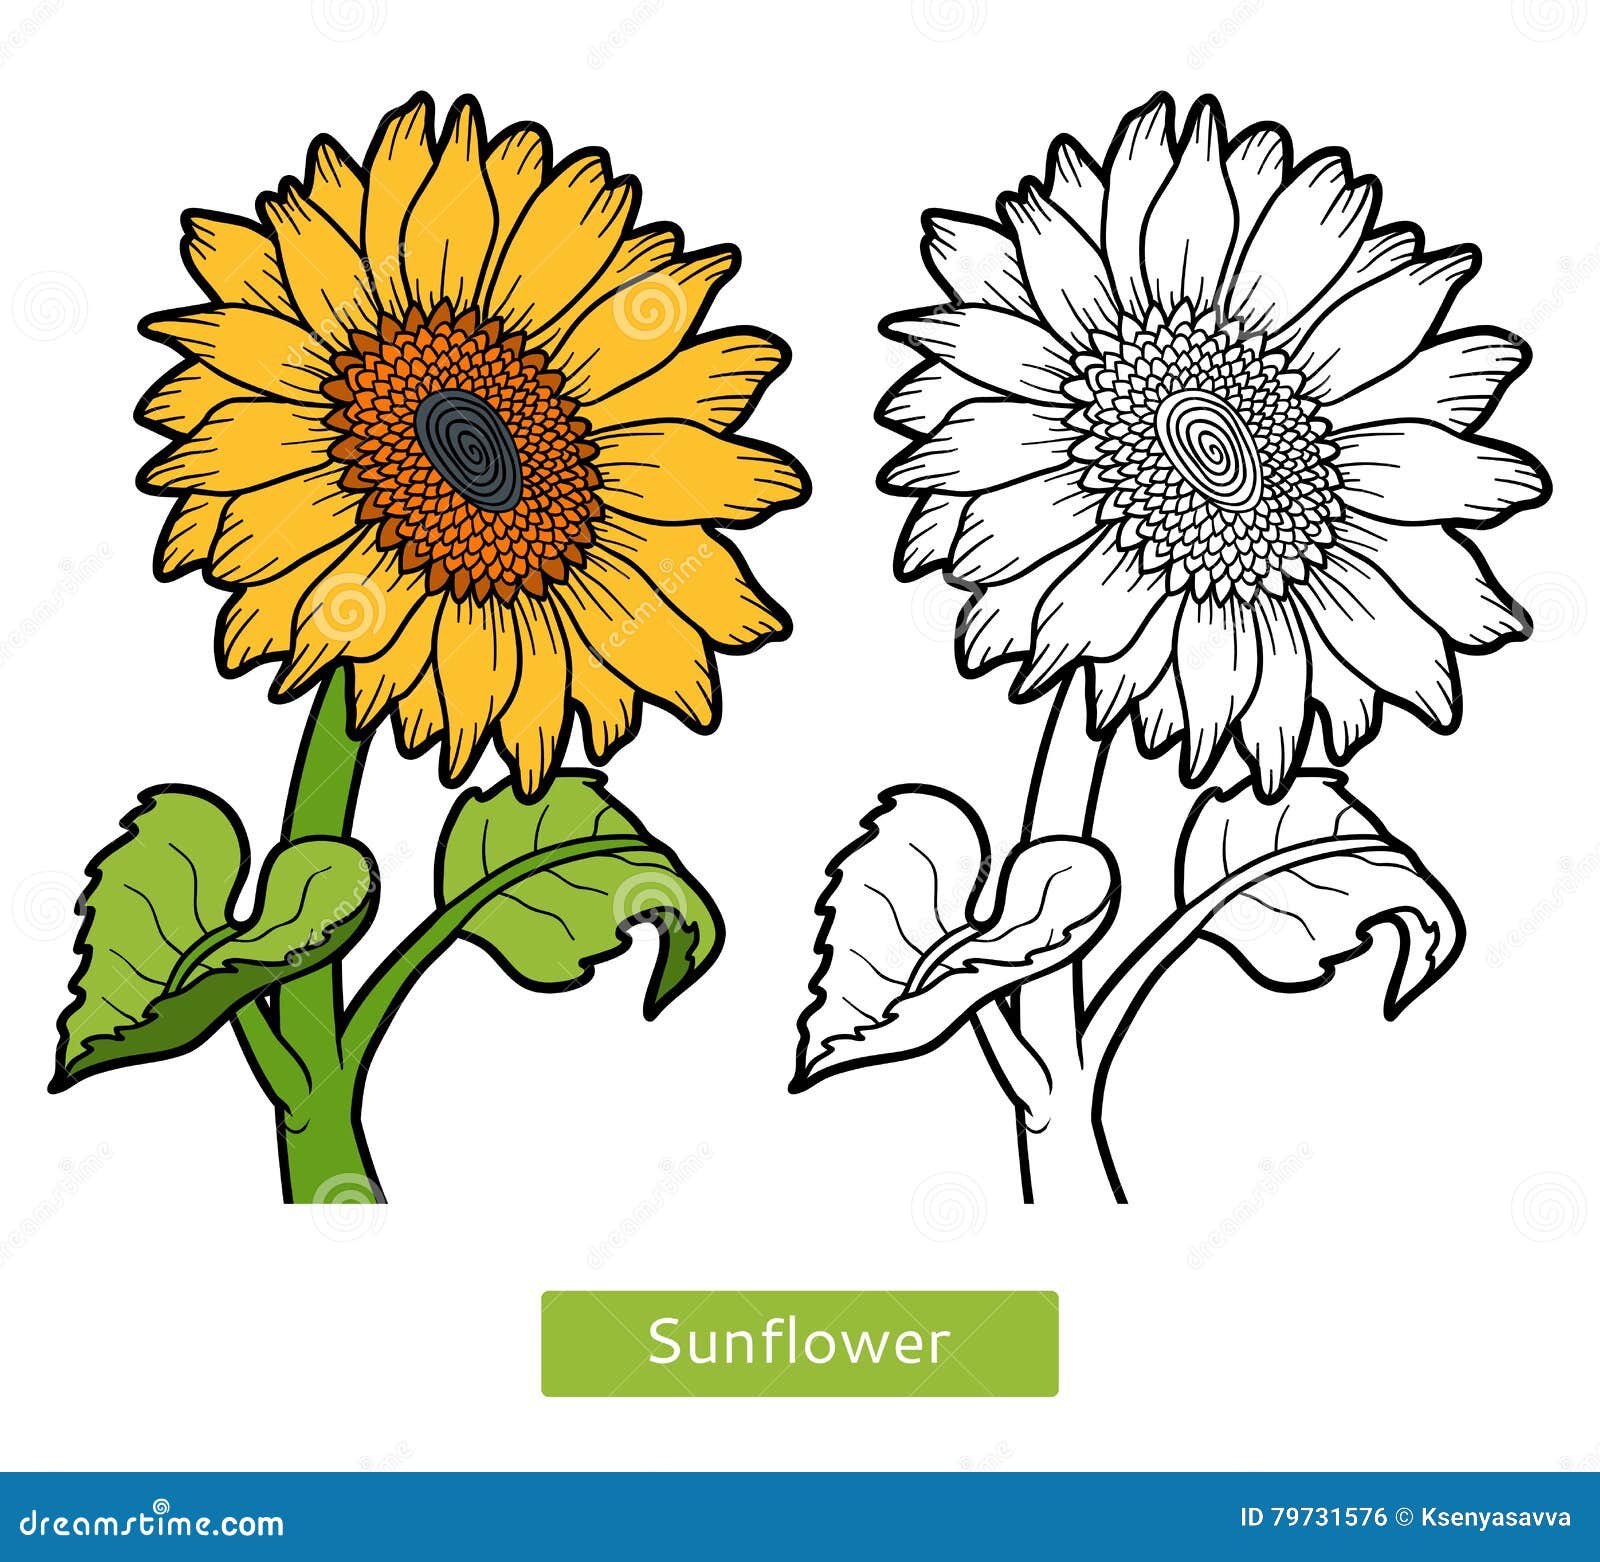 coloring book, flower sunflower